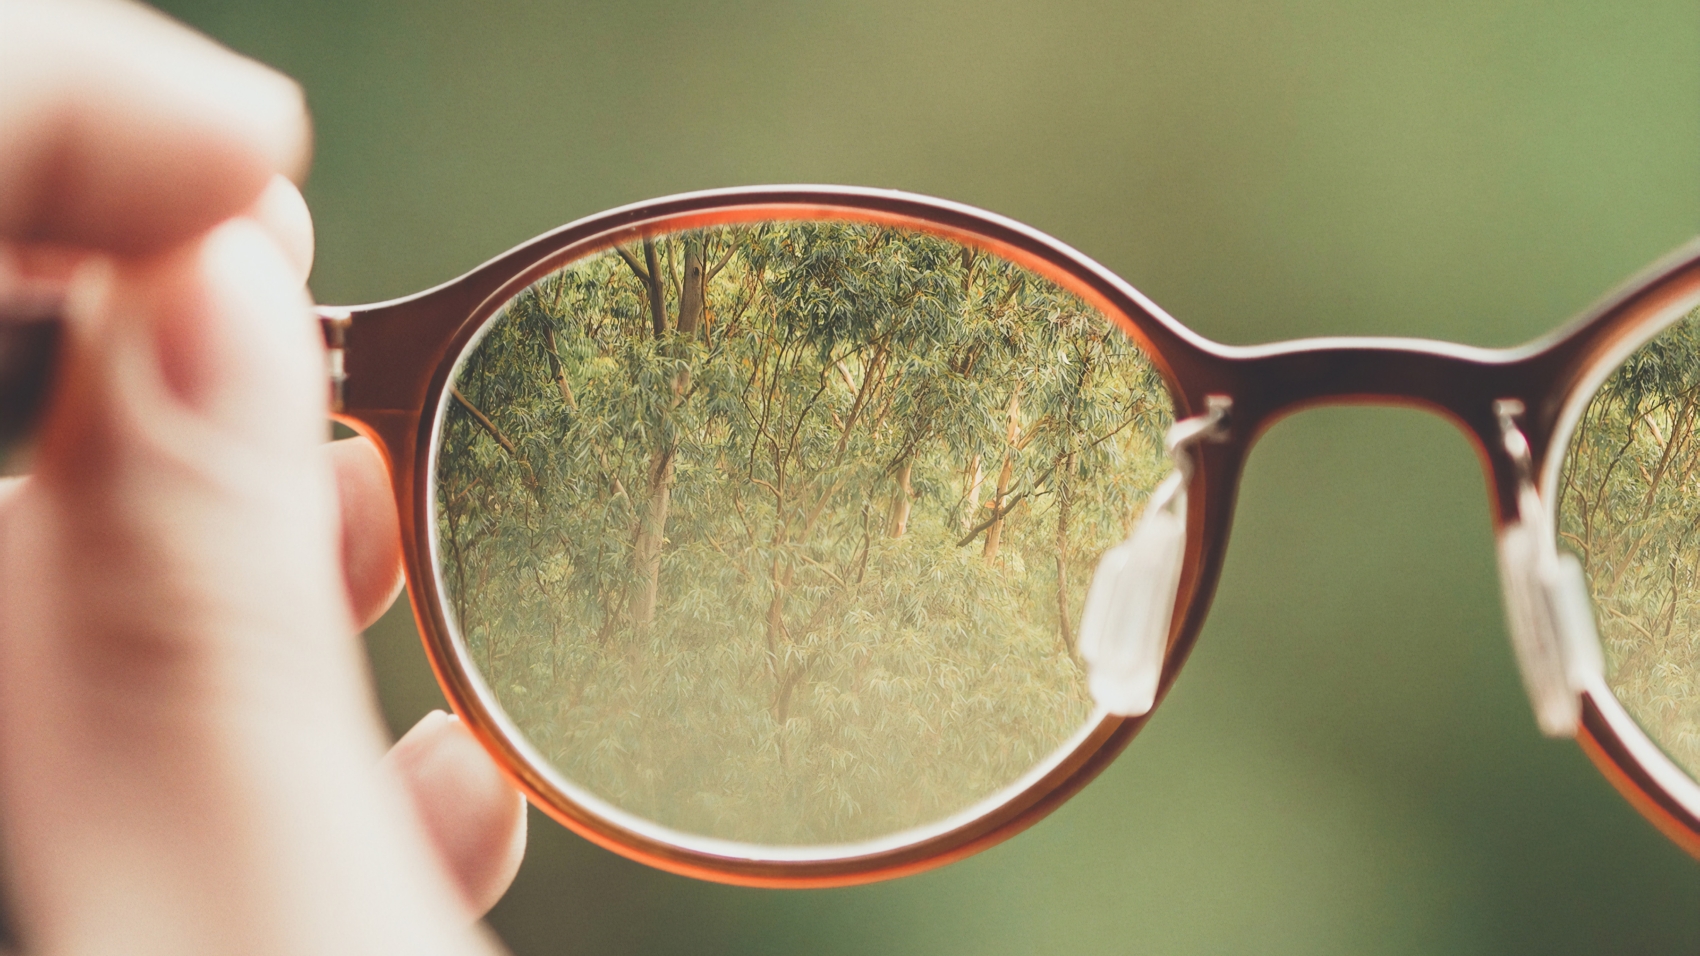 Clarity through spectacles. Photo by Bud Helisson on Unsplash